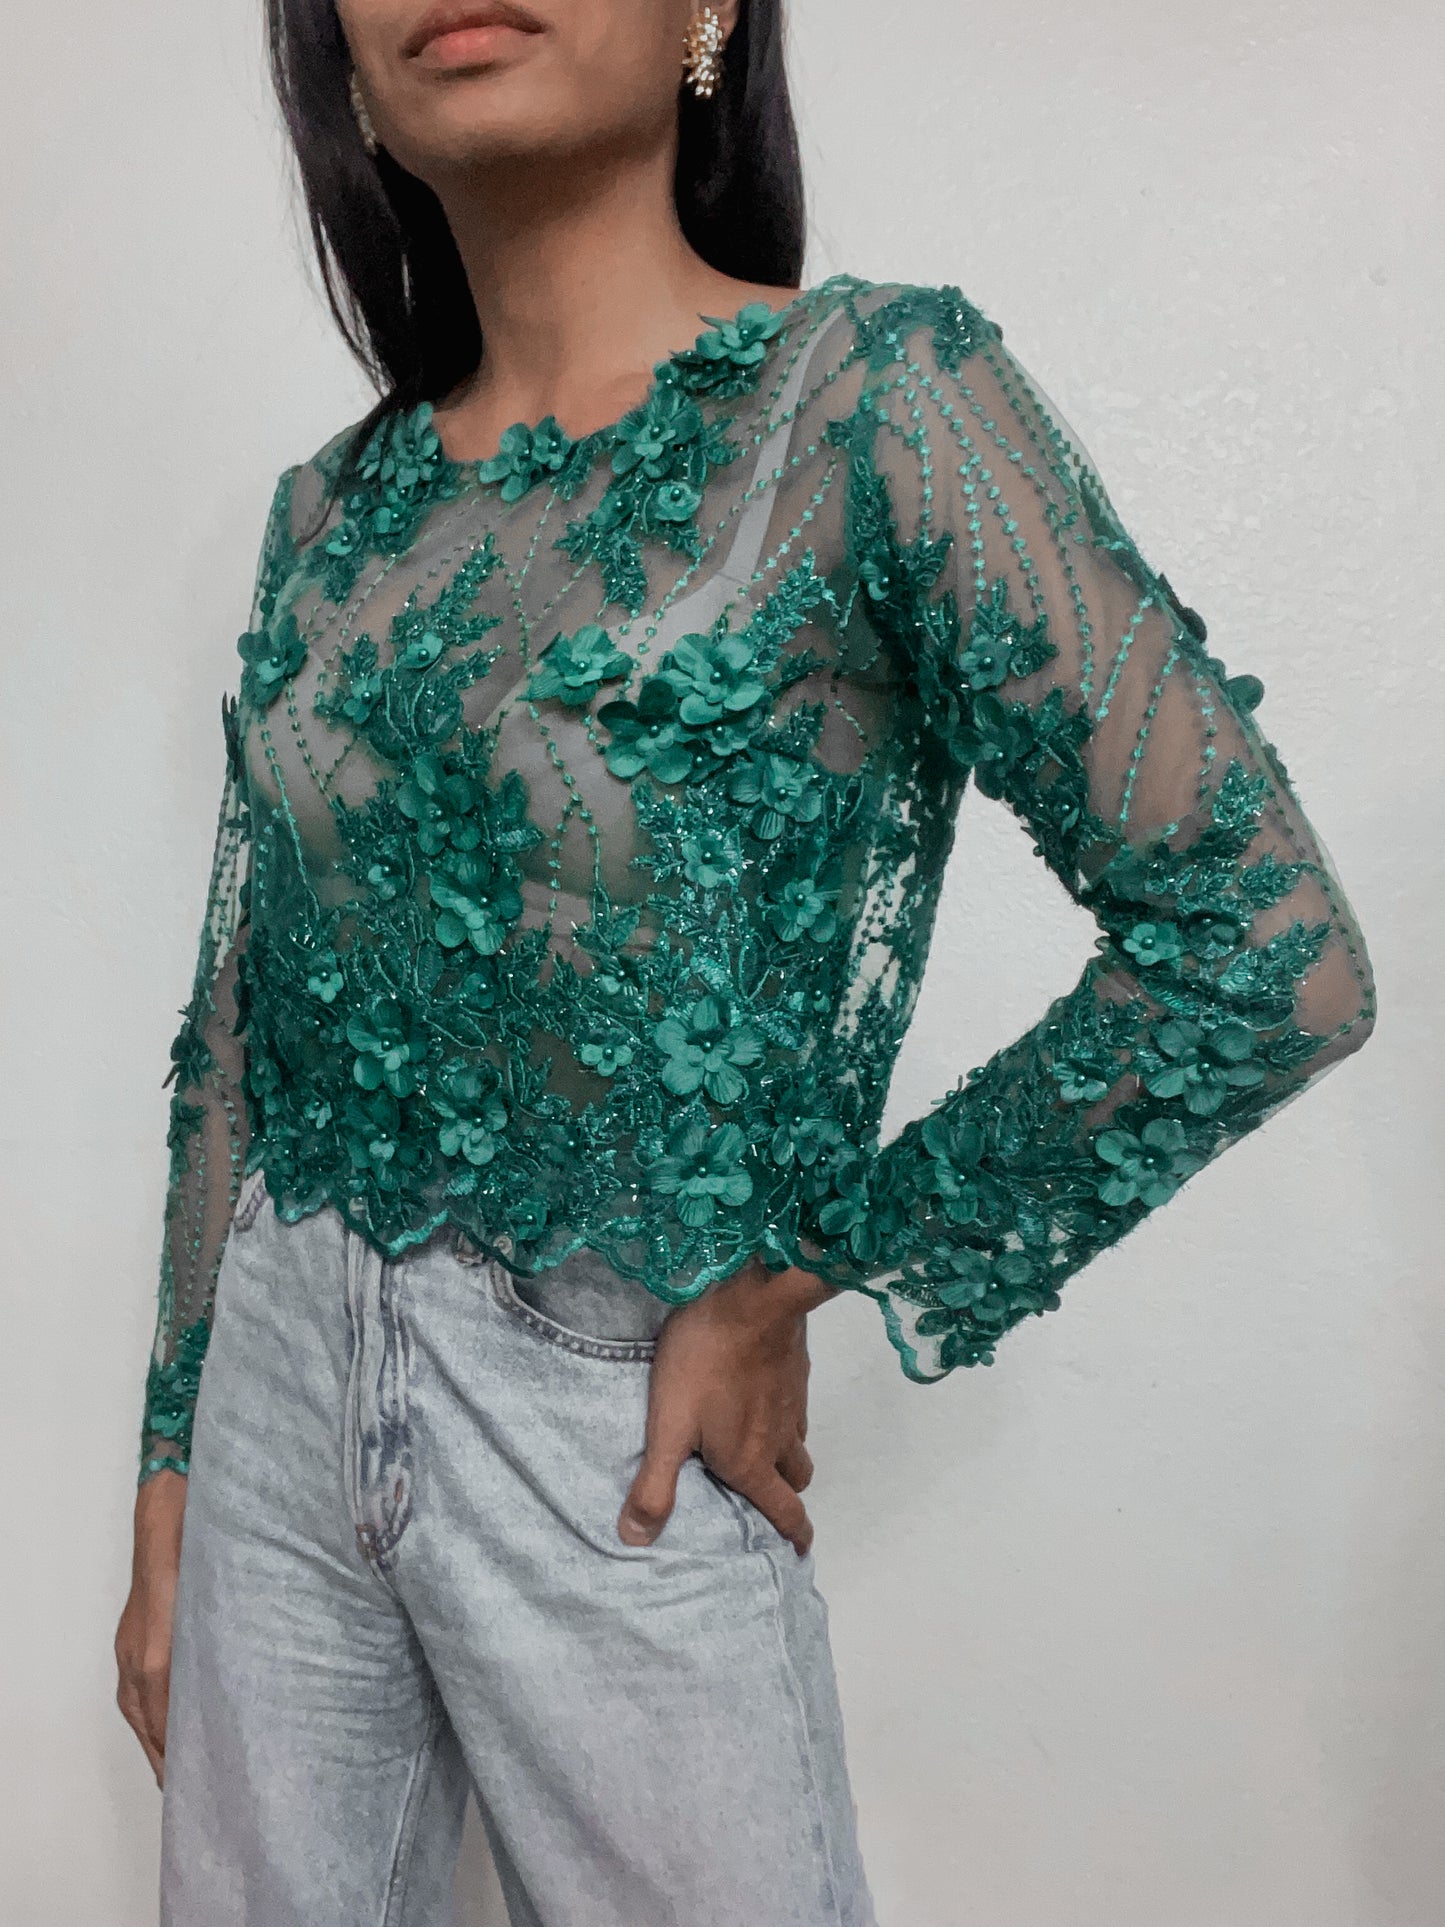 Green Sheer 3D Lace Blouse - Size 8